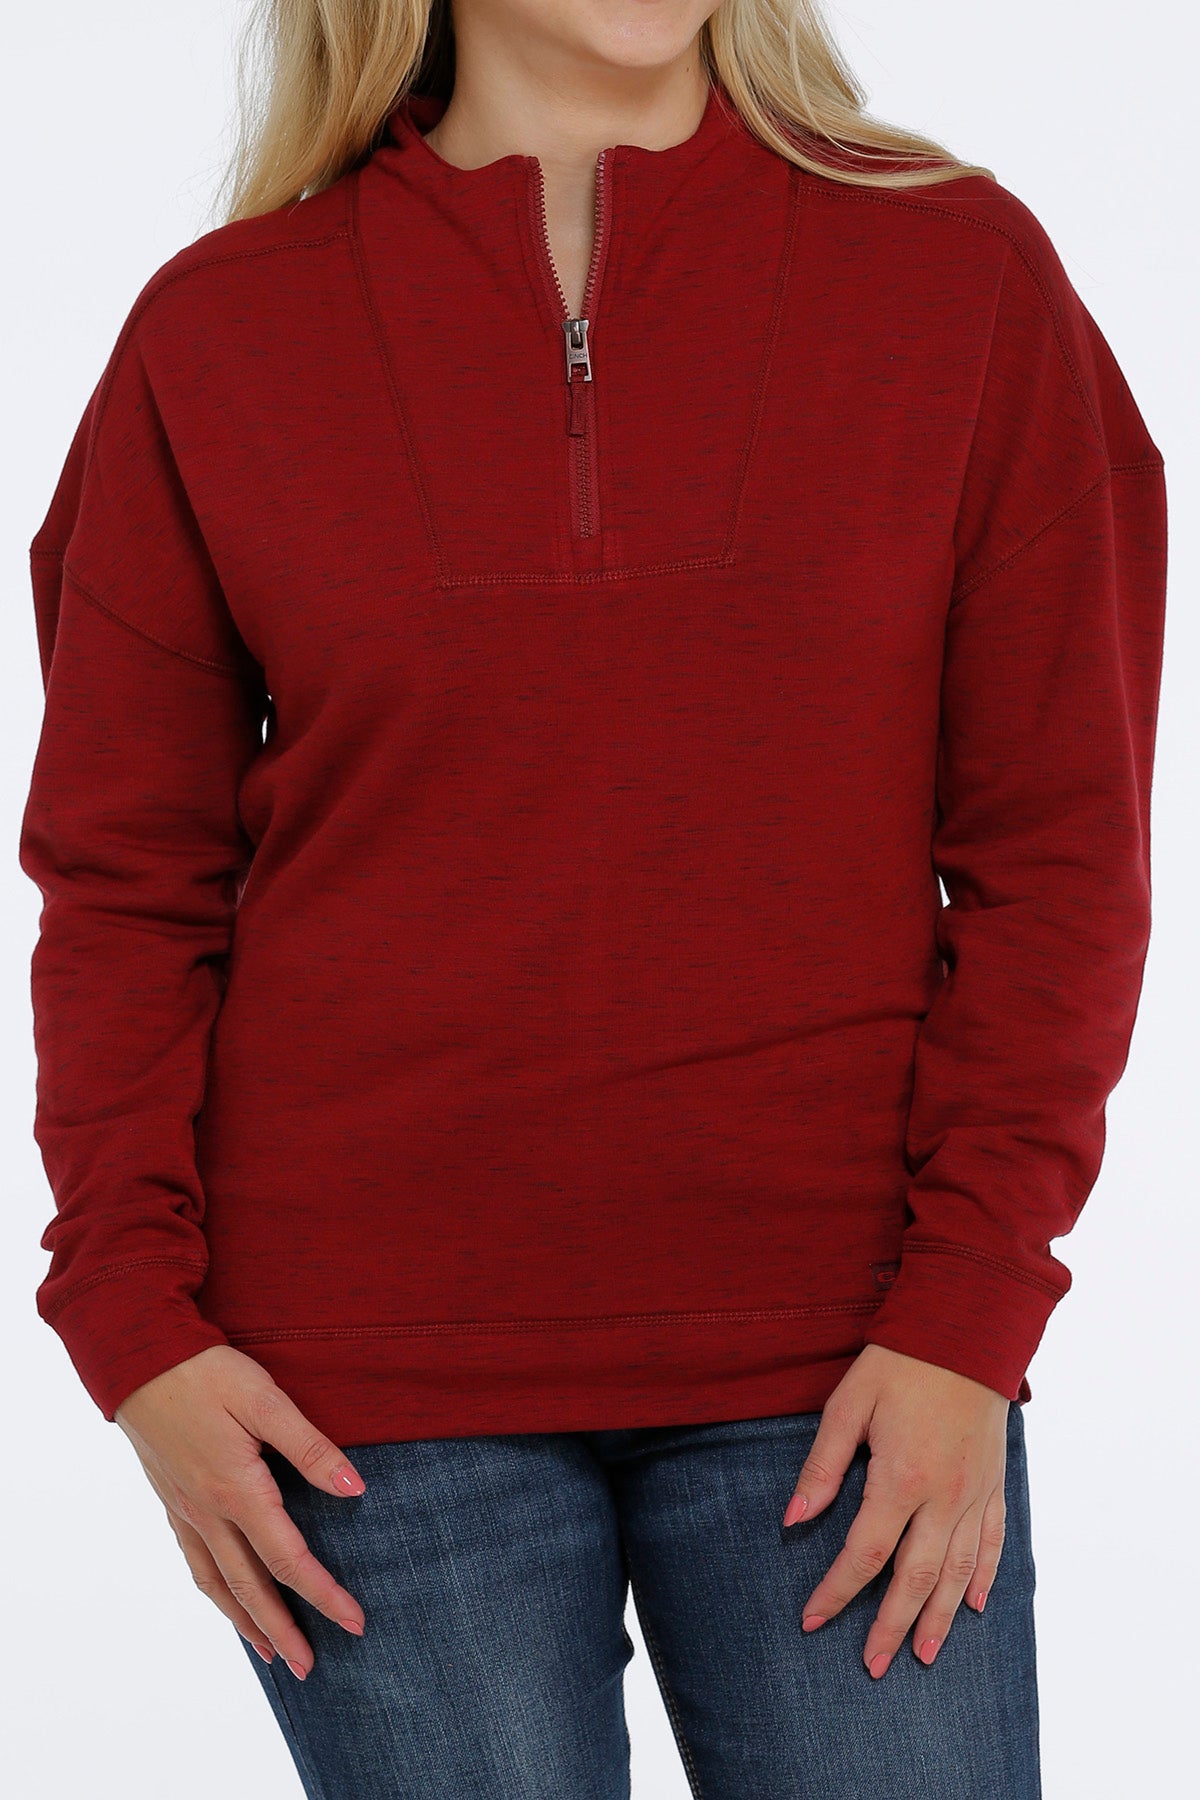 CINCH WOMEN'S FRENCH TERRY PULLOVER - HEATHER RED